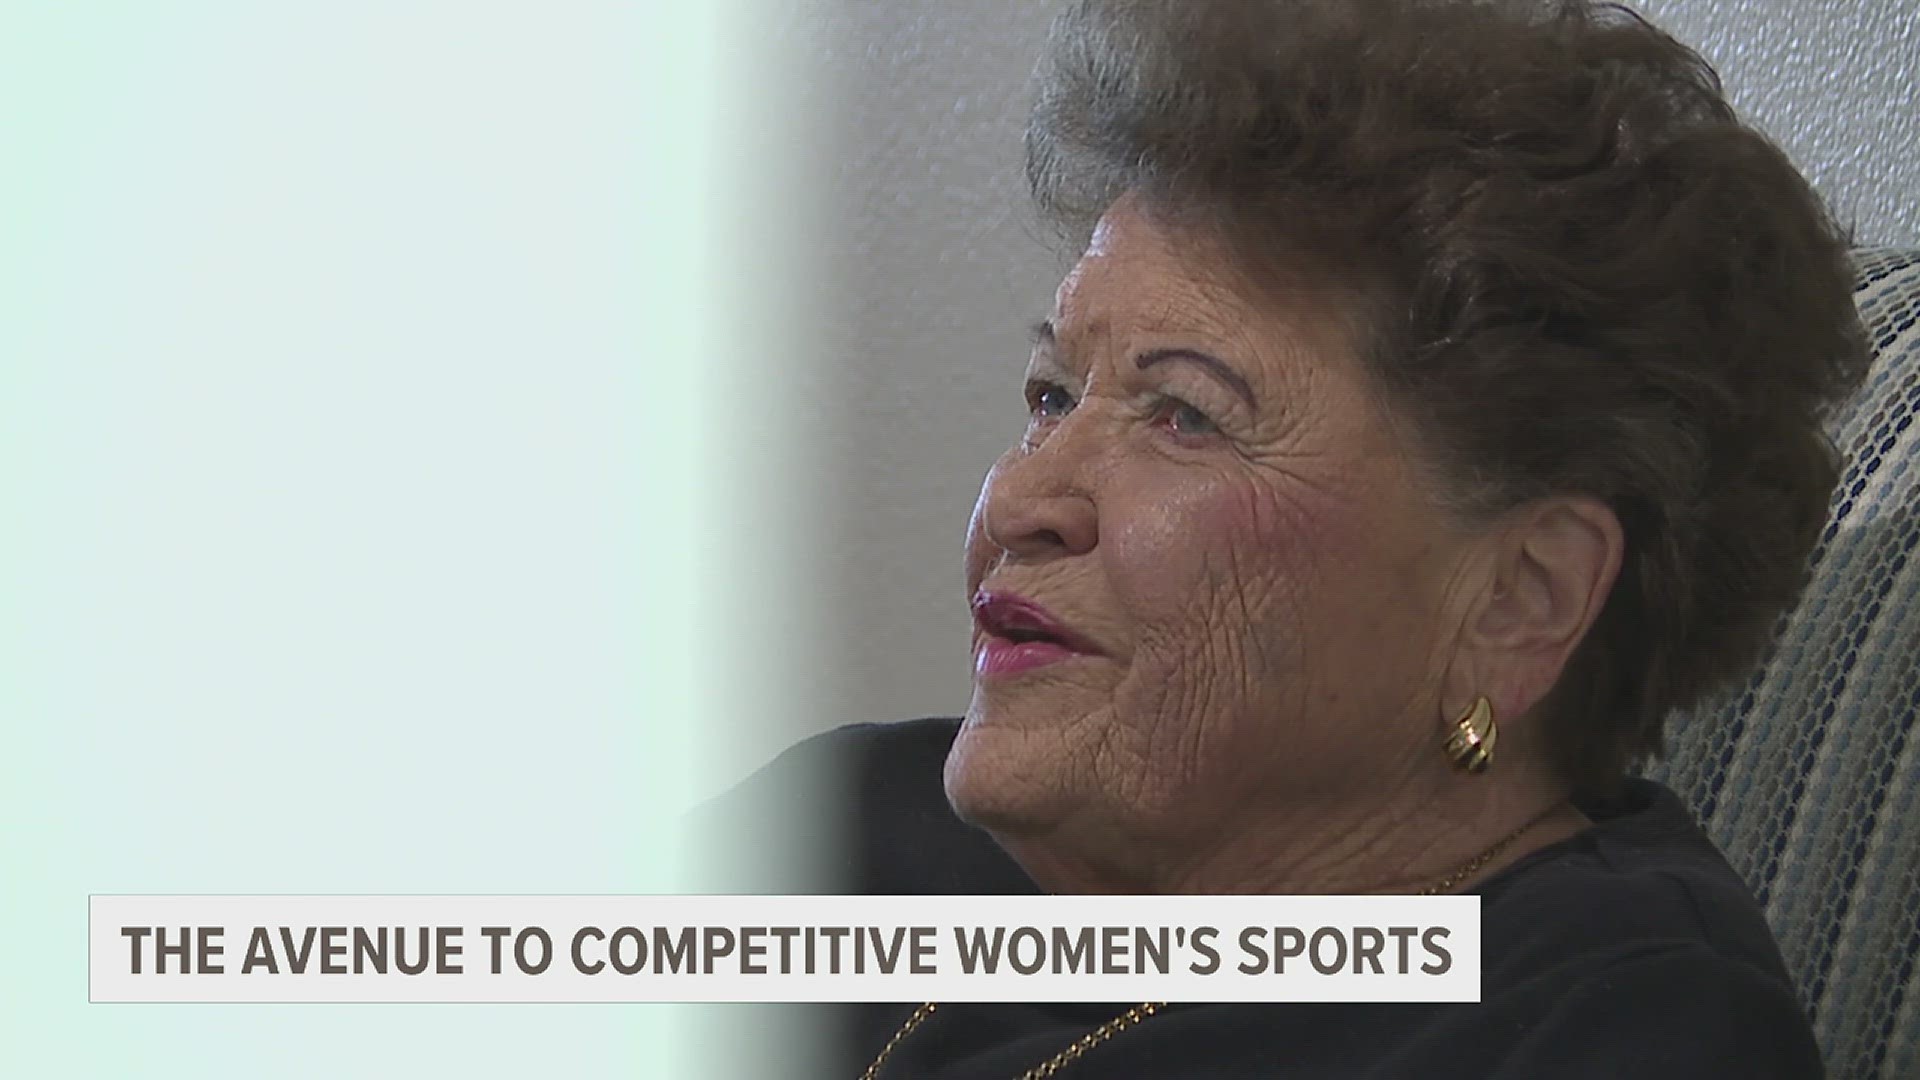 In 1968, Helen Smiley was tasked with starting up a competitive women's athletic program at the University of Iowa, with a budget of less than $800 for seven teams.